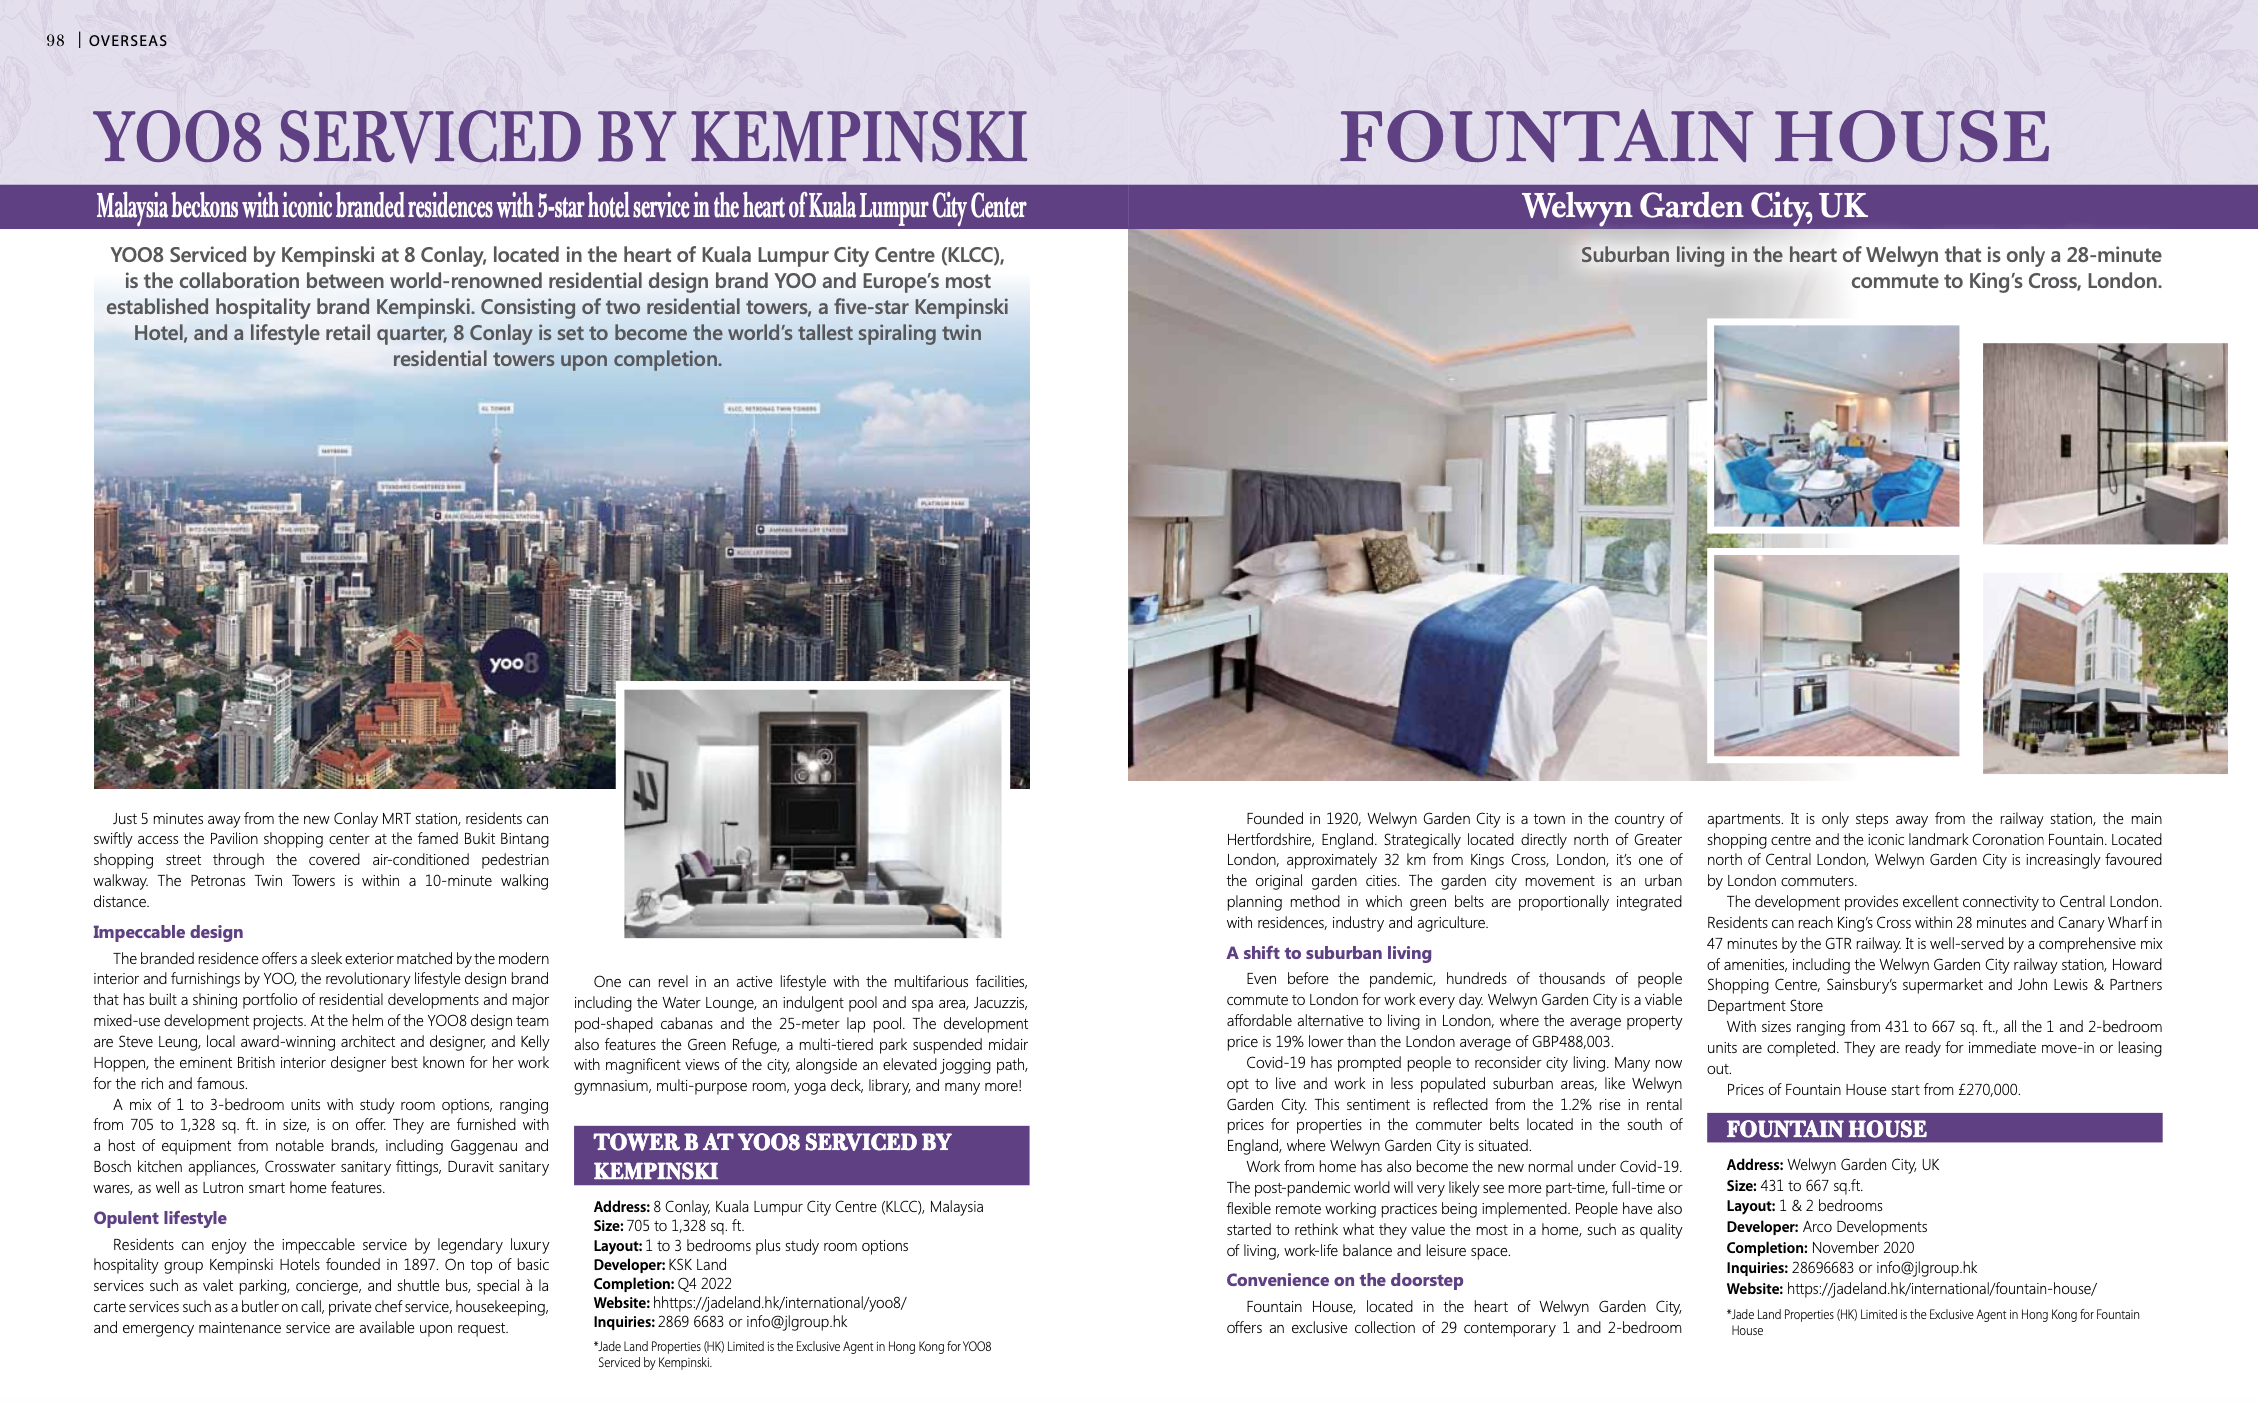 Malaysia beckons with iconic branded residences with 5-star hotel service in the heart of Kuala Lumpur City Center